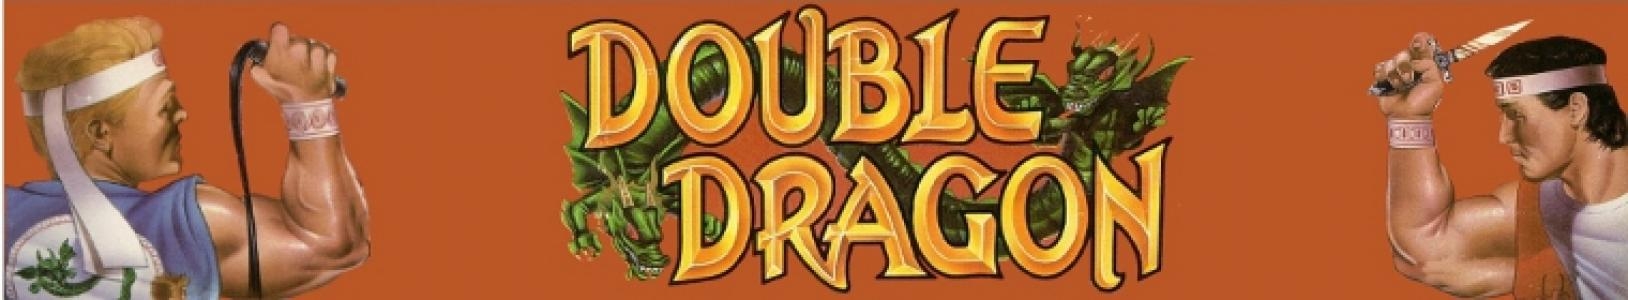 Double Dragon banner